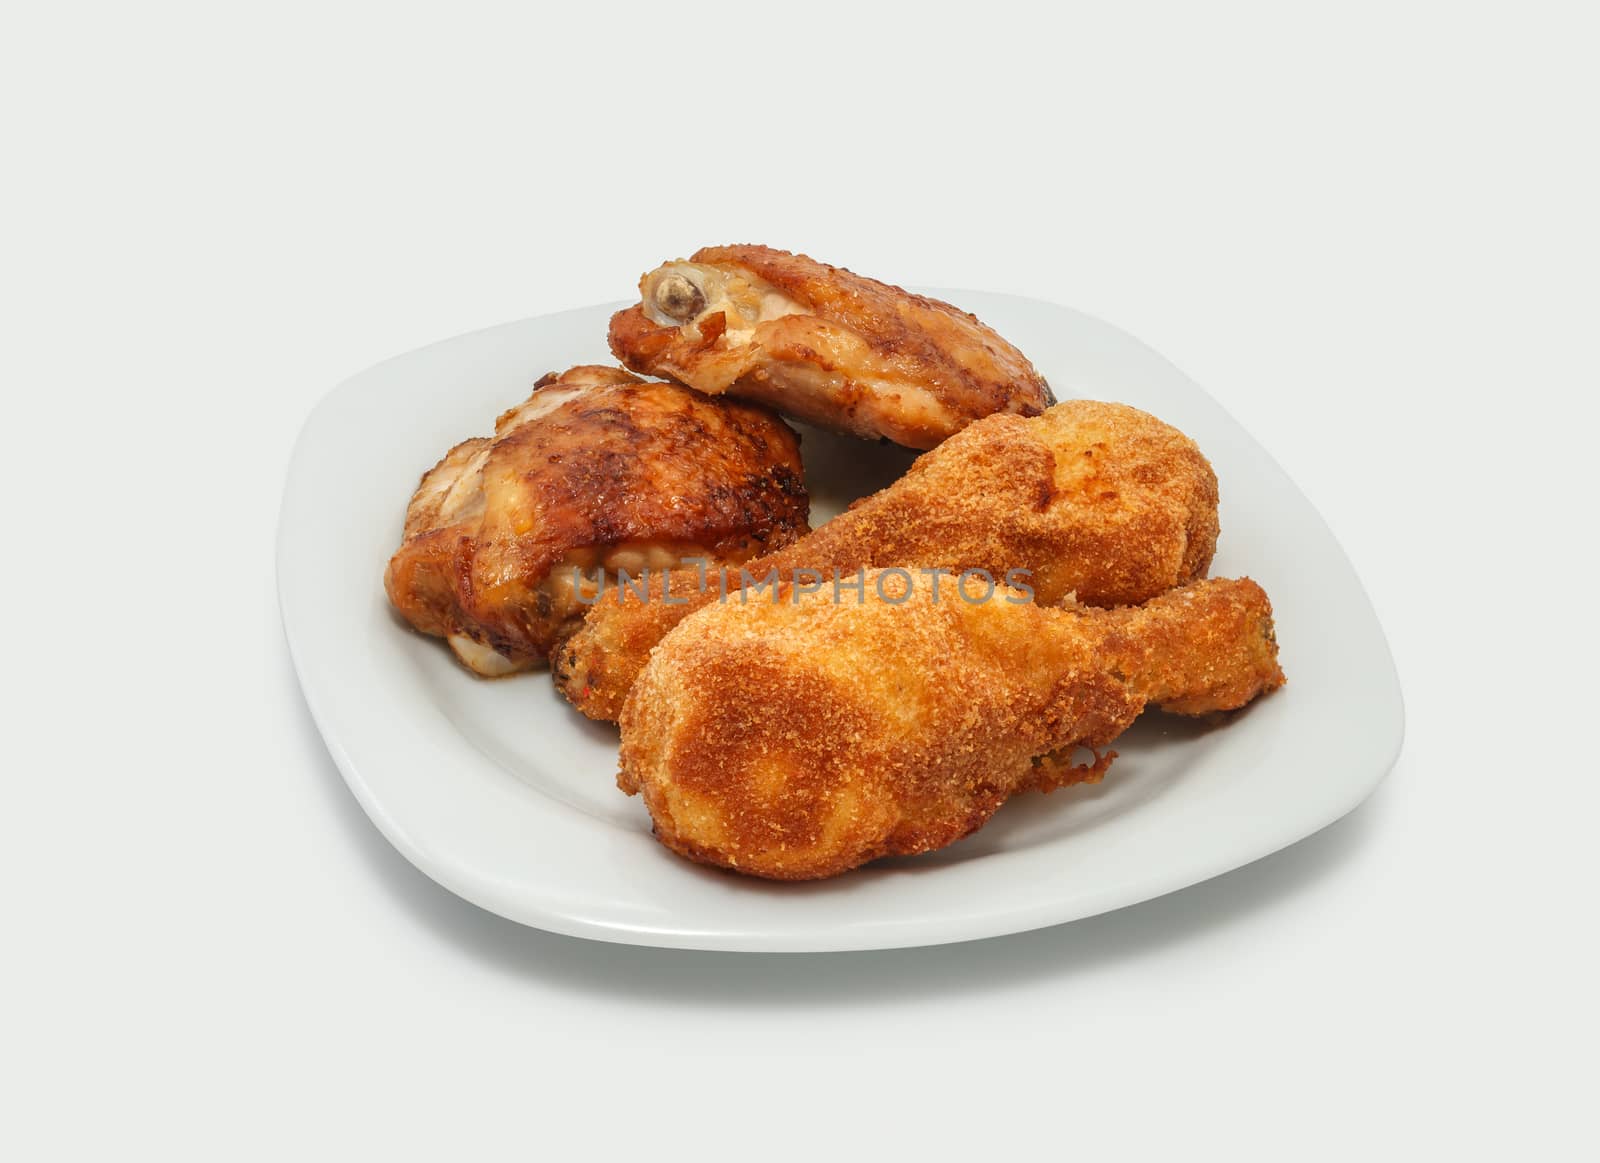 Fried chicken pieces on a plate. Taken on a sheet of white plastic. Is not an isolate.